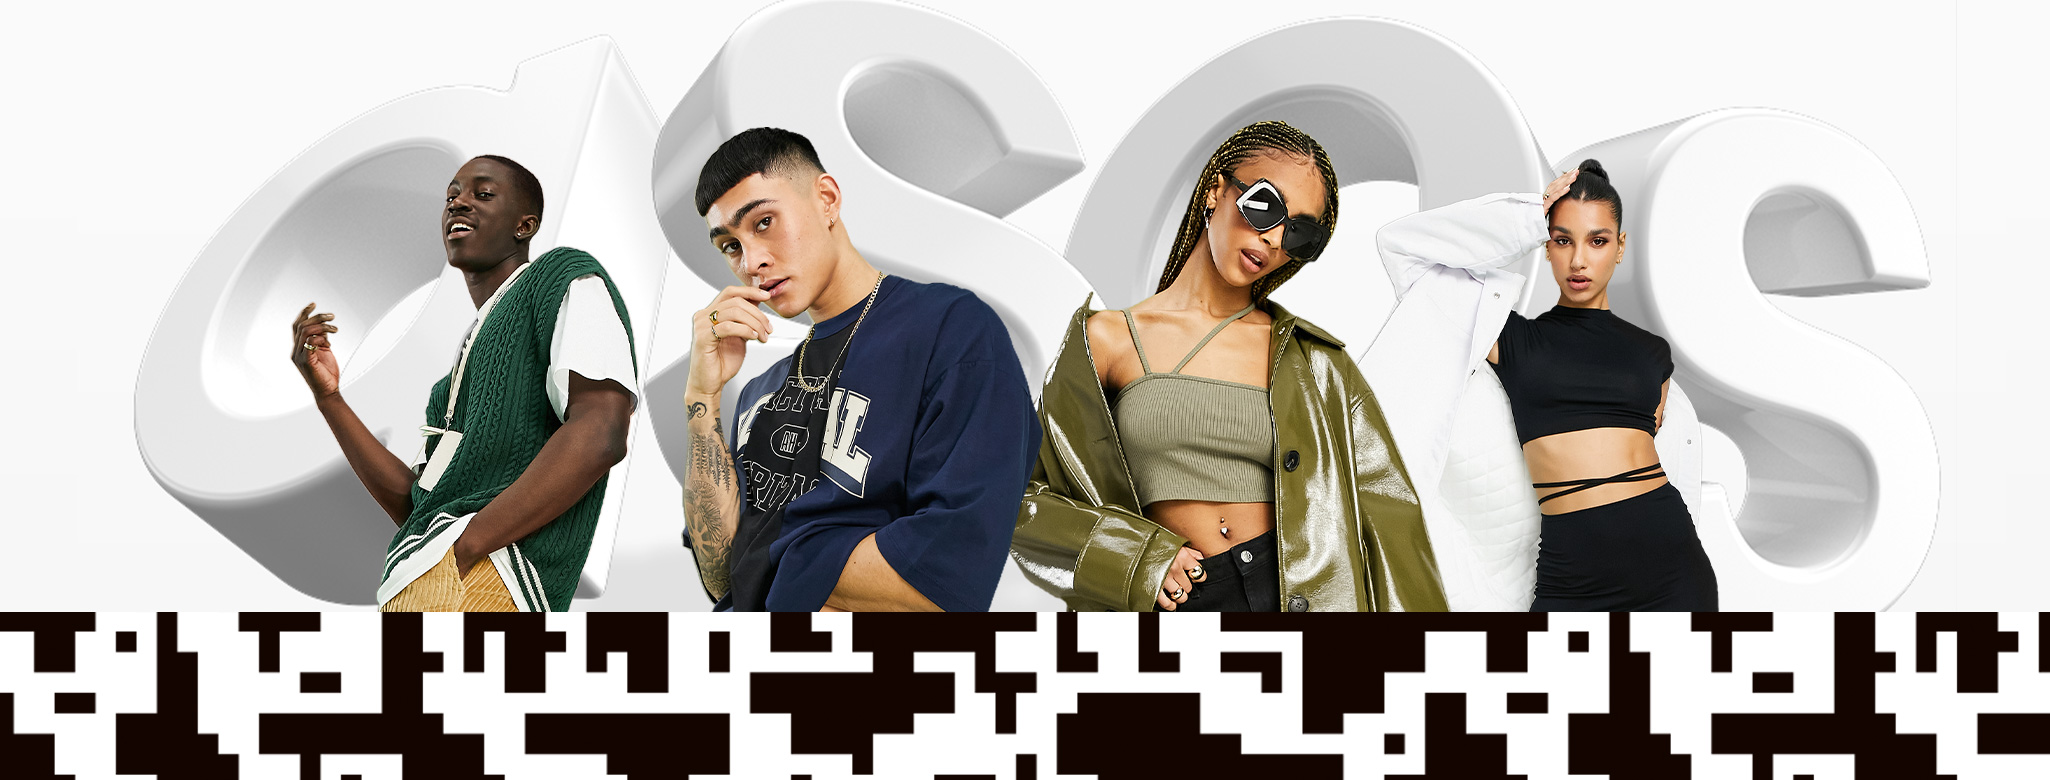 ASOS EOFY sale extra 20% OFF almost everything with promo code